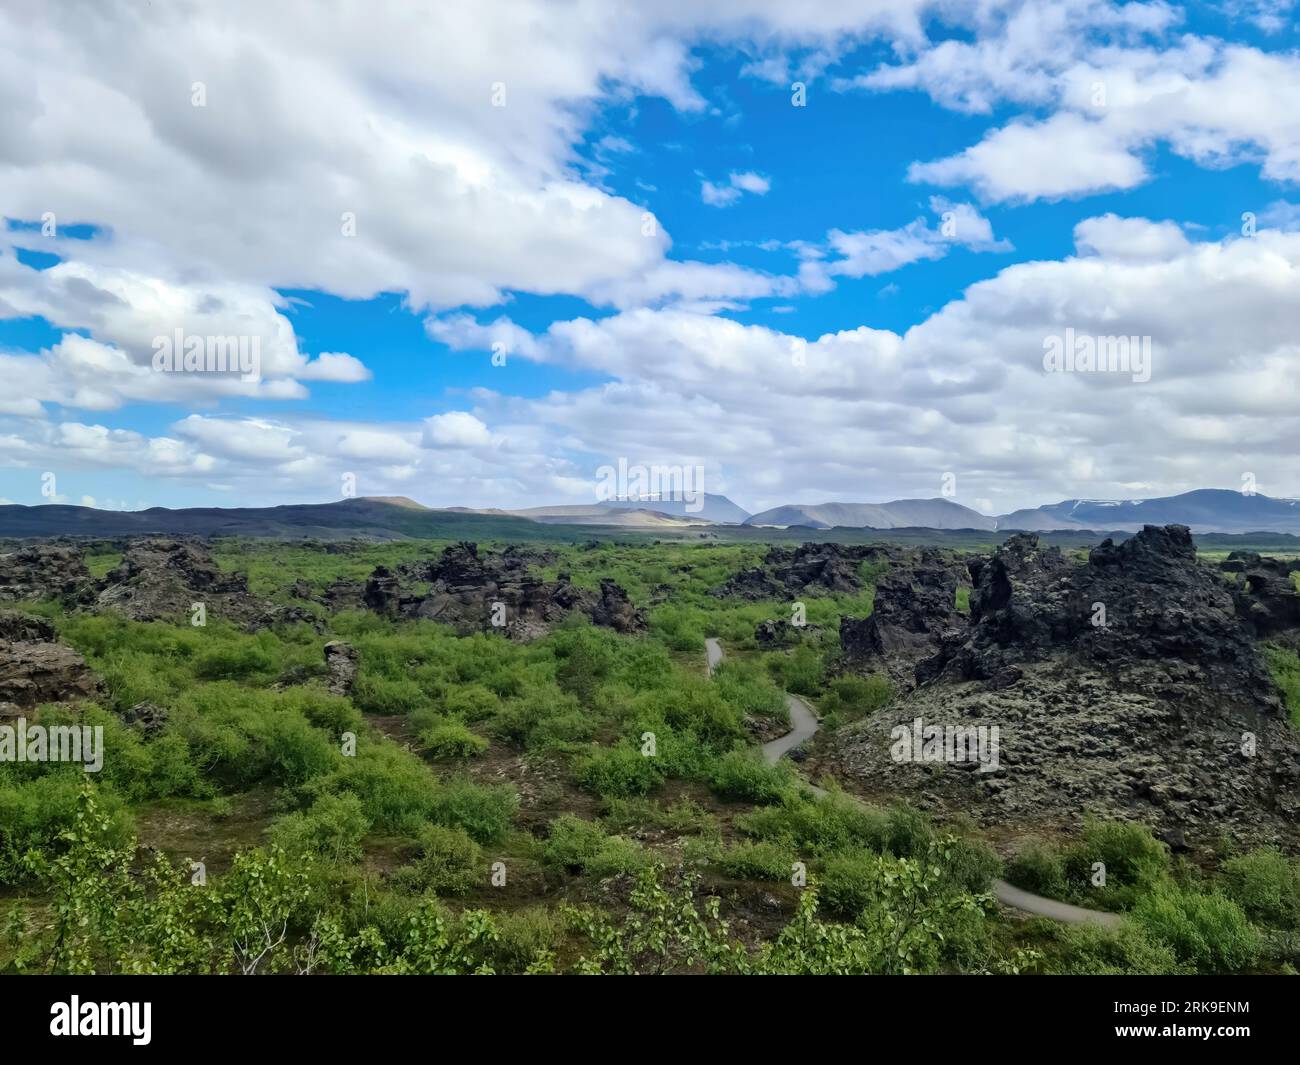 View Of The Lava Fields Of A Past Volcanic Eruption In Iceland Stock Photo